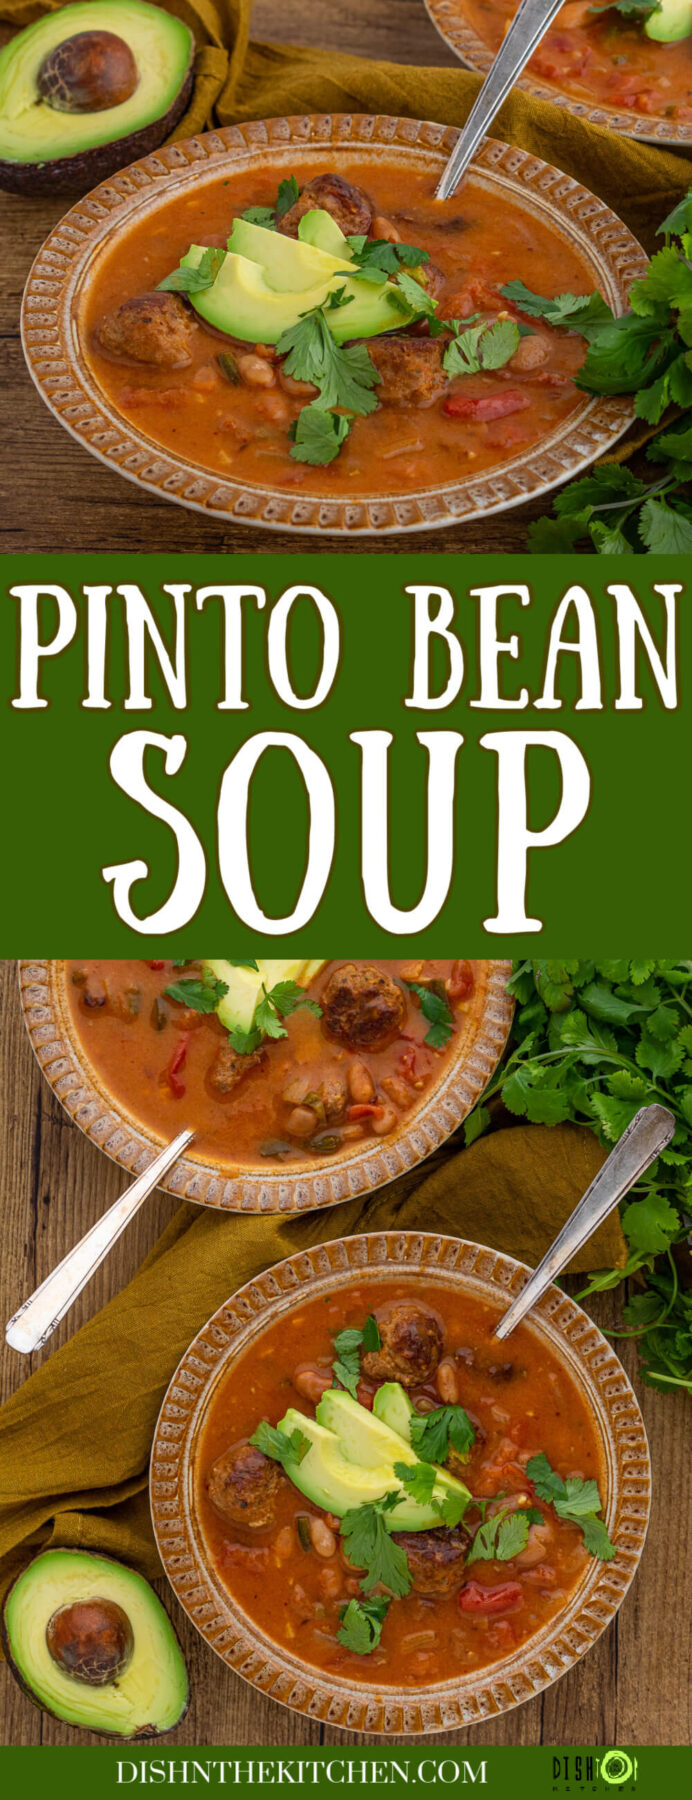 Pinterest image featuring inviting bowls of spicy Pinto Bean Soup garnished with sliced avocado and fresh cilantro.